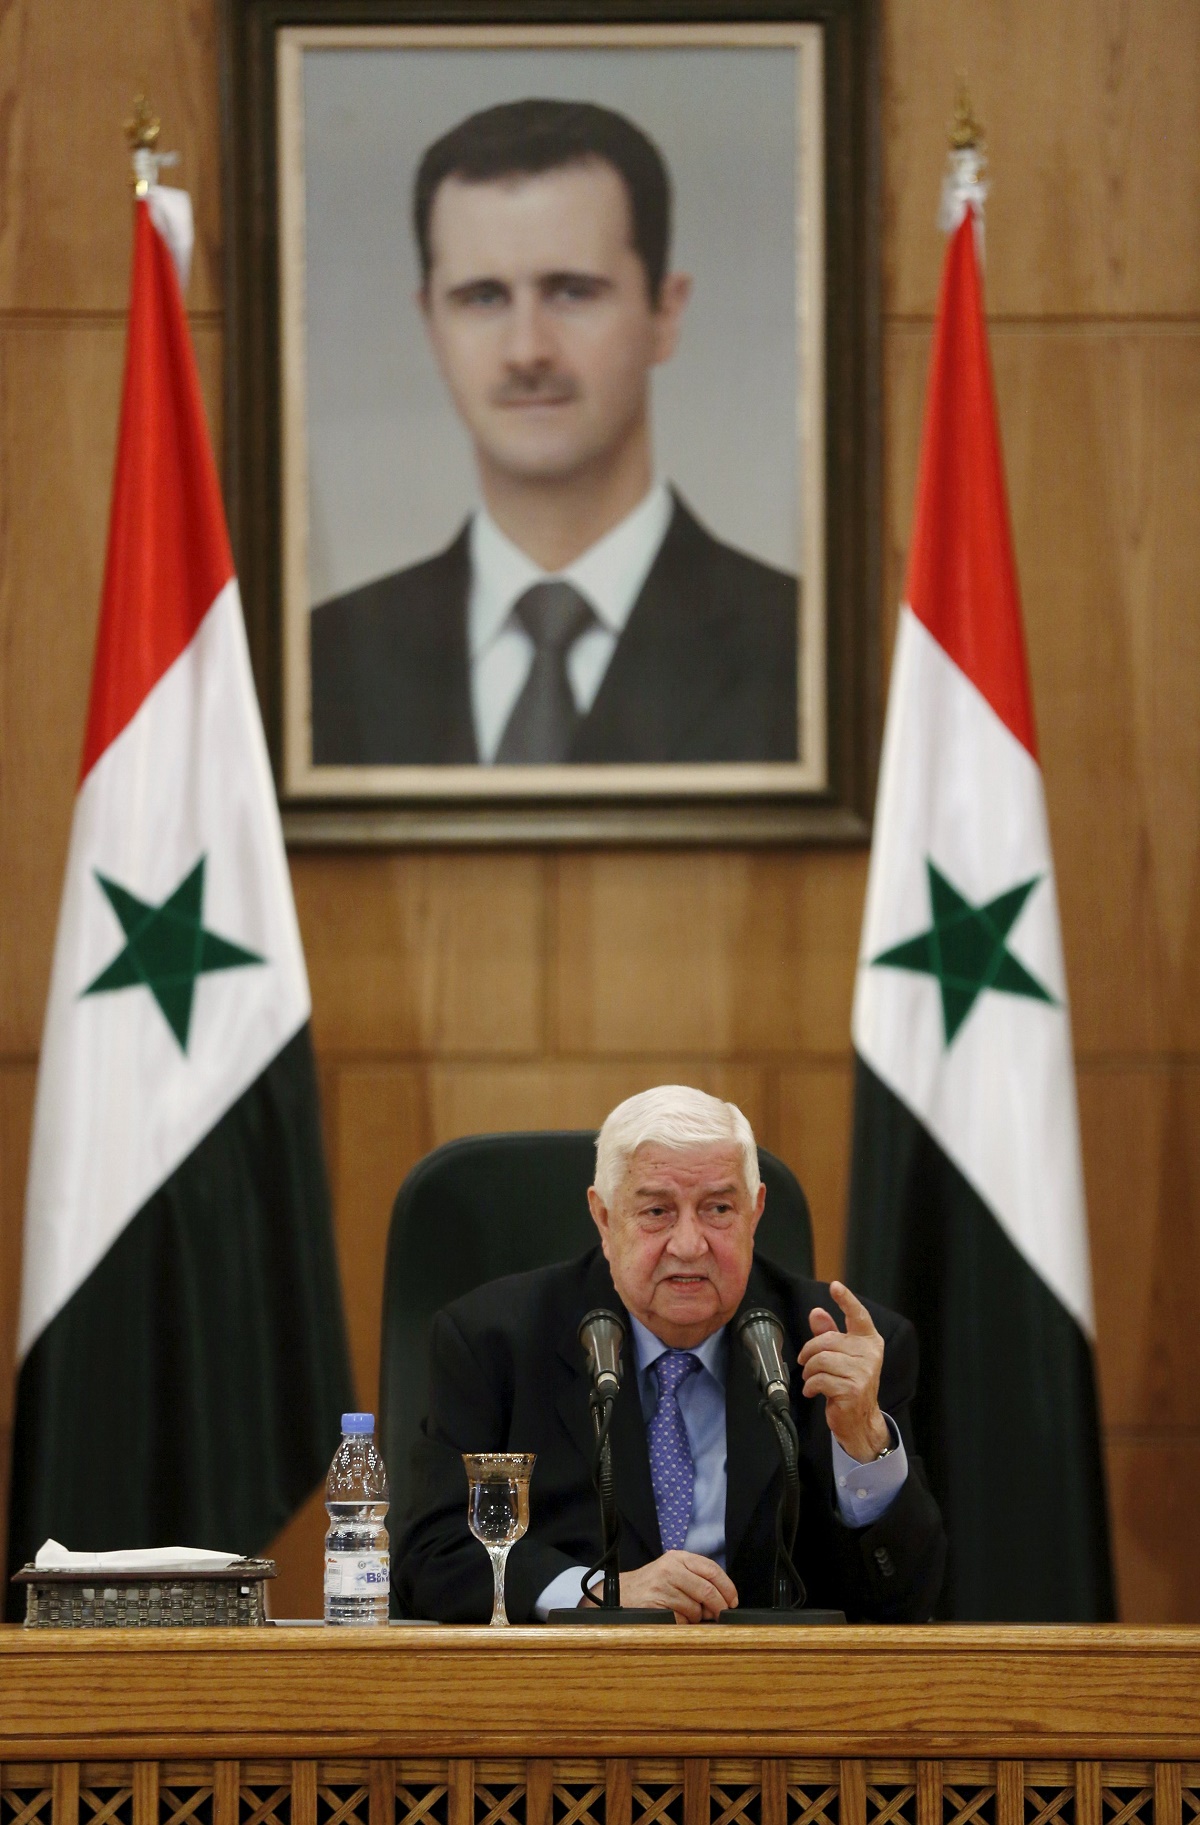 Syria's Foreign Minister Walid Muallem speaks during a news conference in Damascus, Syria today. – Reuters pic, March 12, 2016.